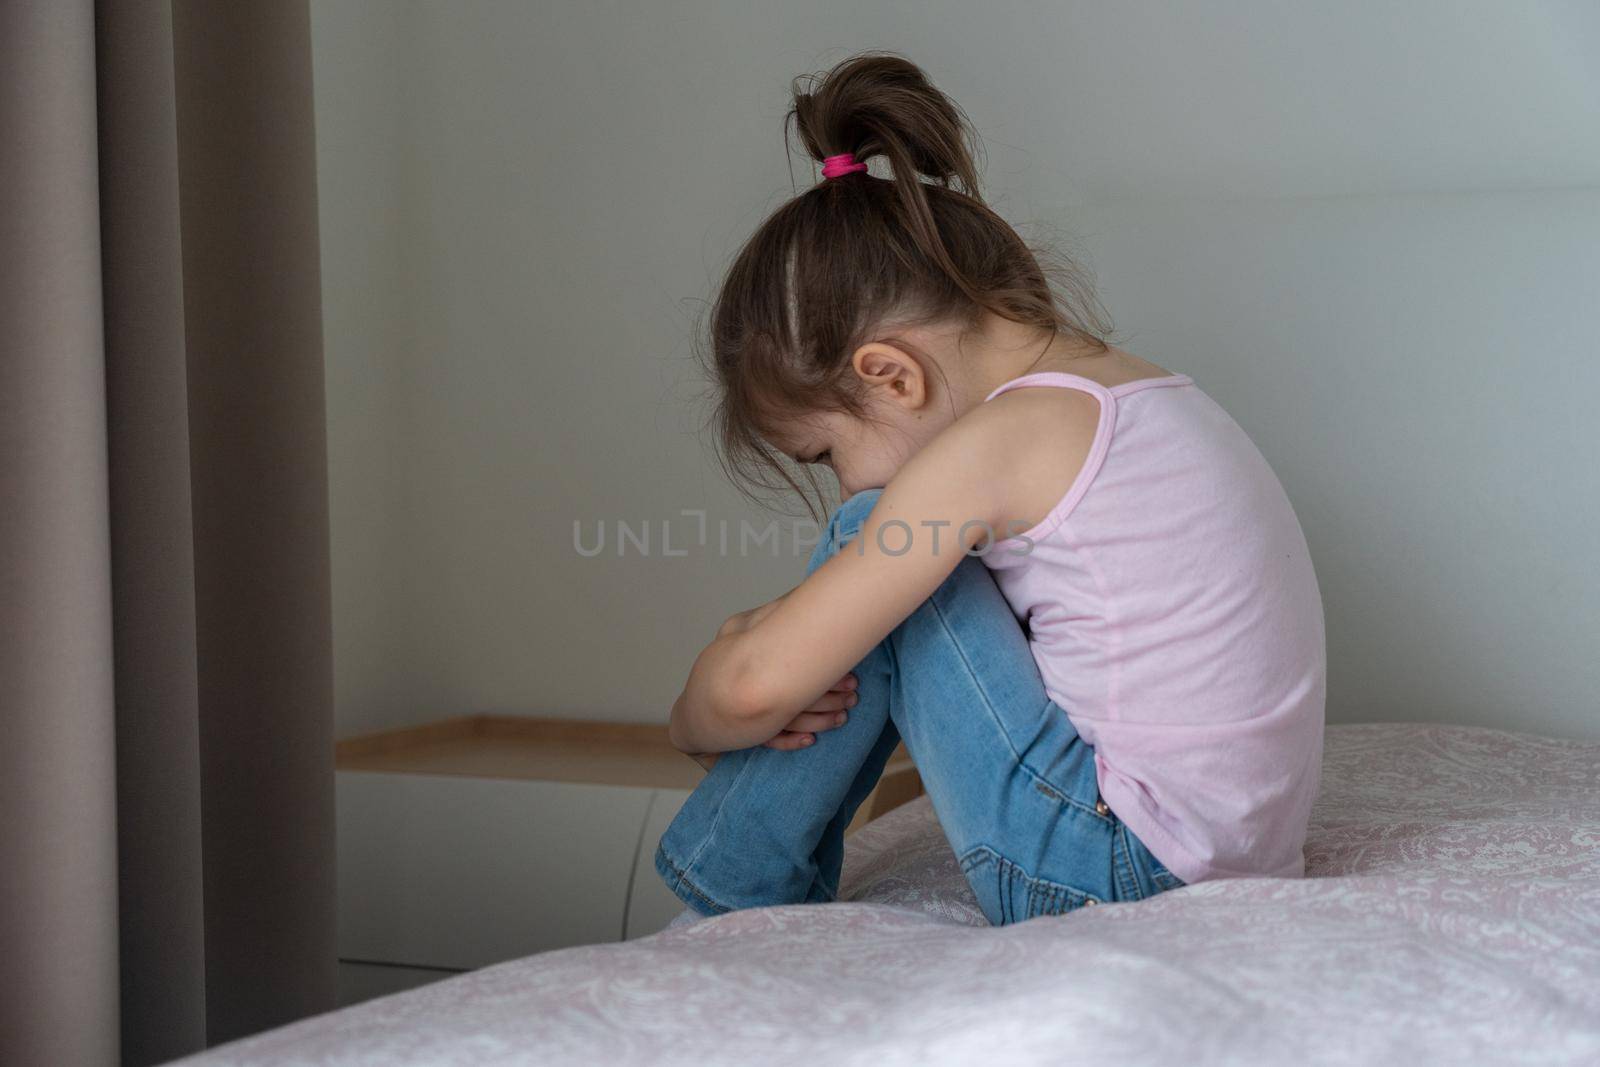 A little girl sitting on a bed